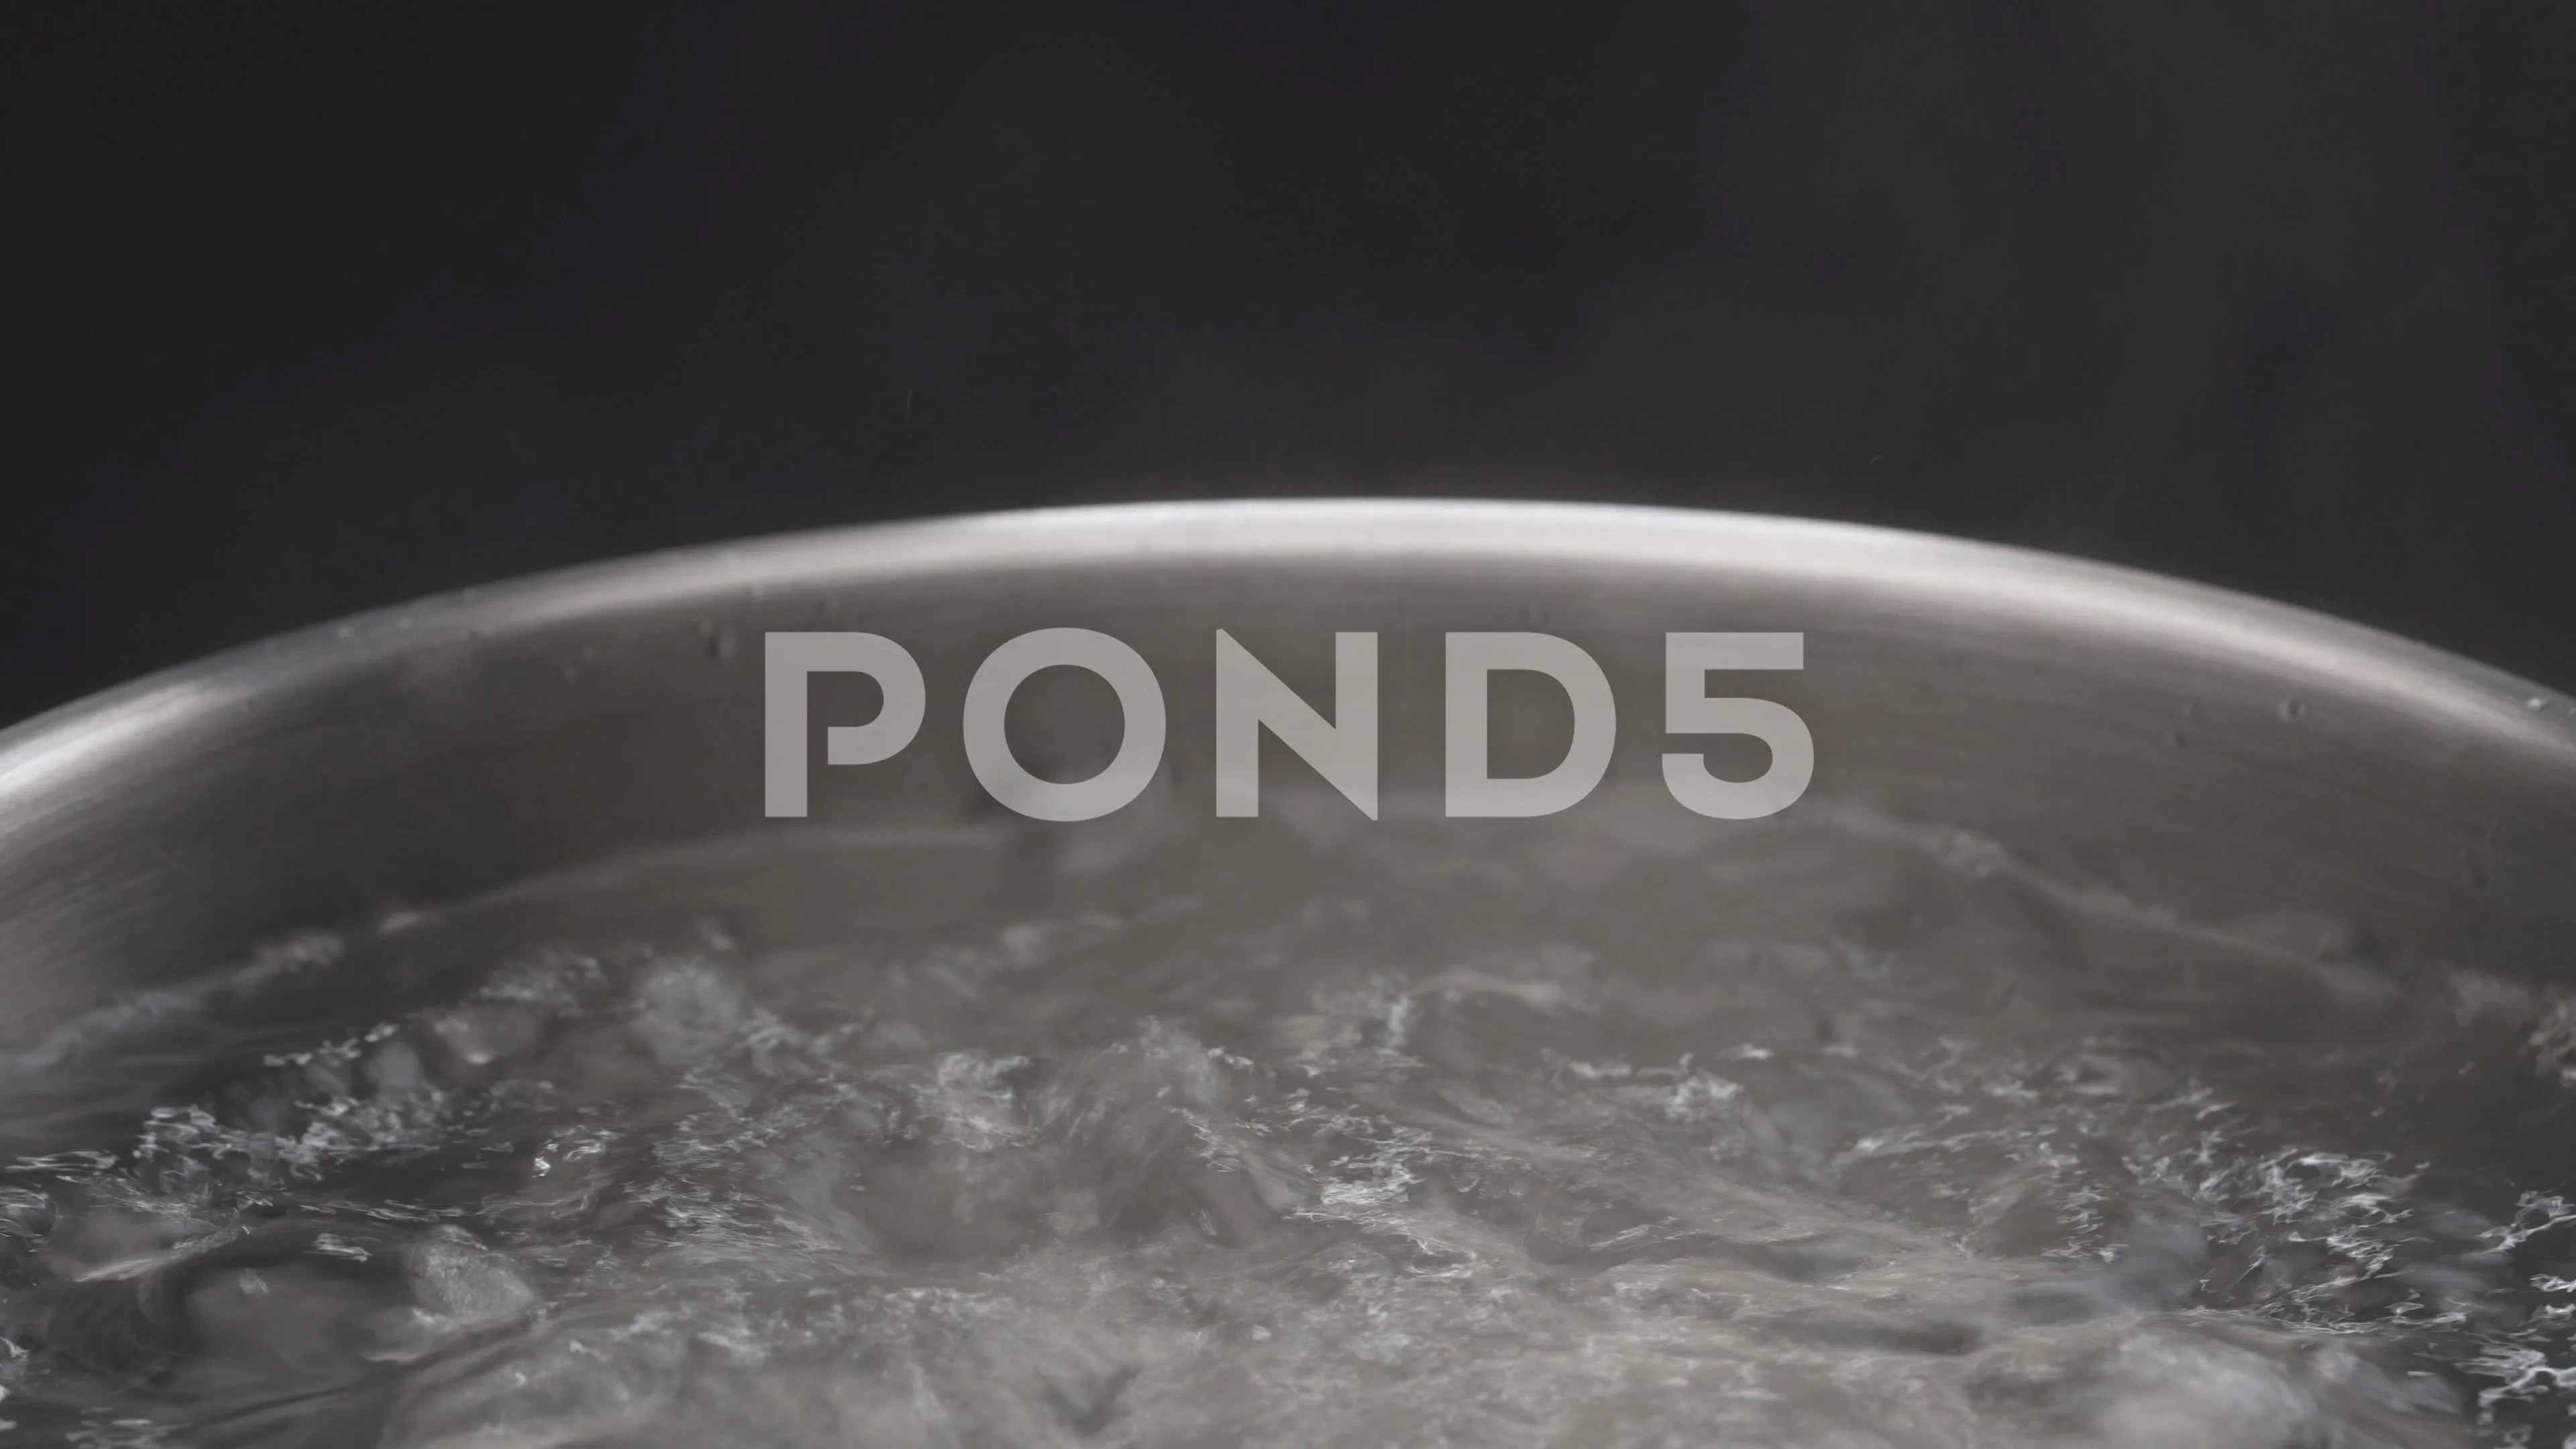 https://images.pond5.com/water-boiling-cooking-pot-isolated-126208400_prevstill.jpeg